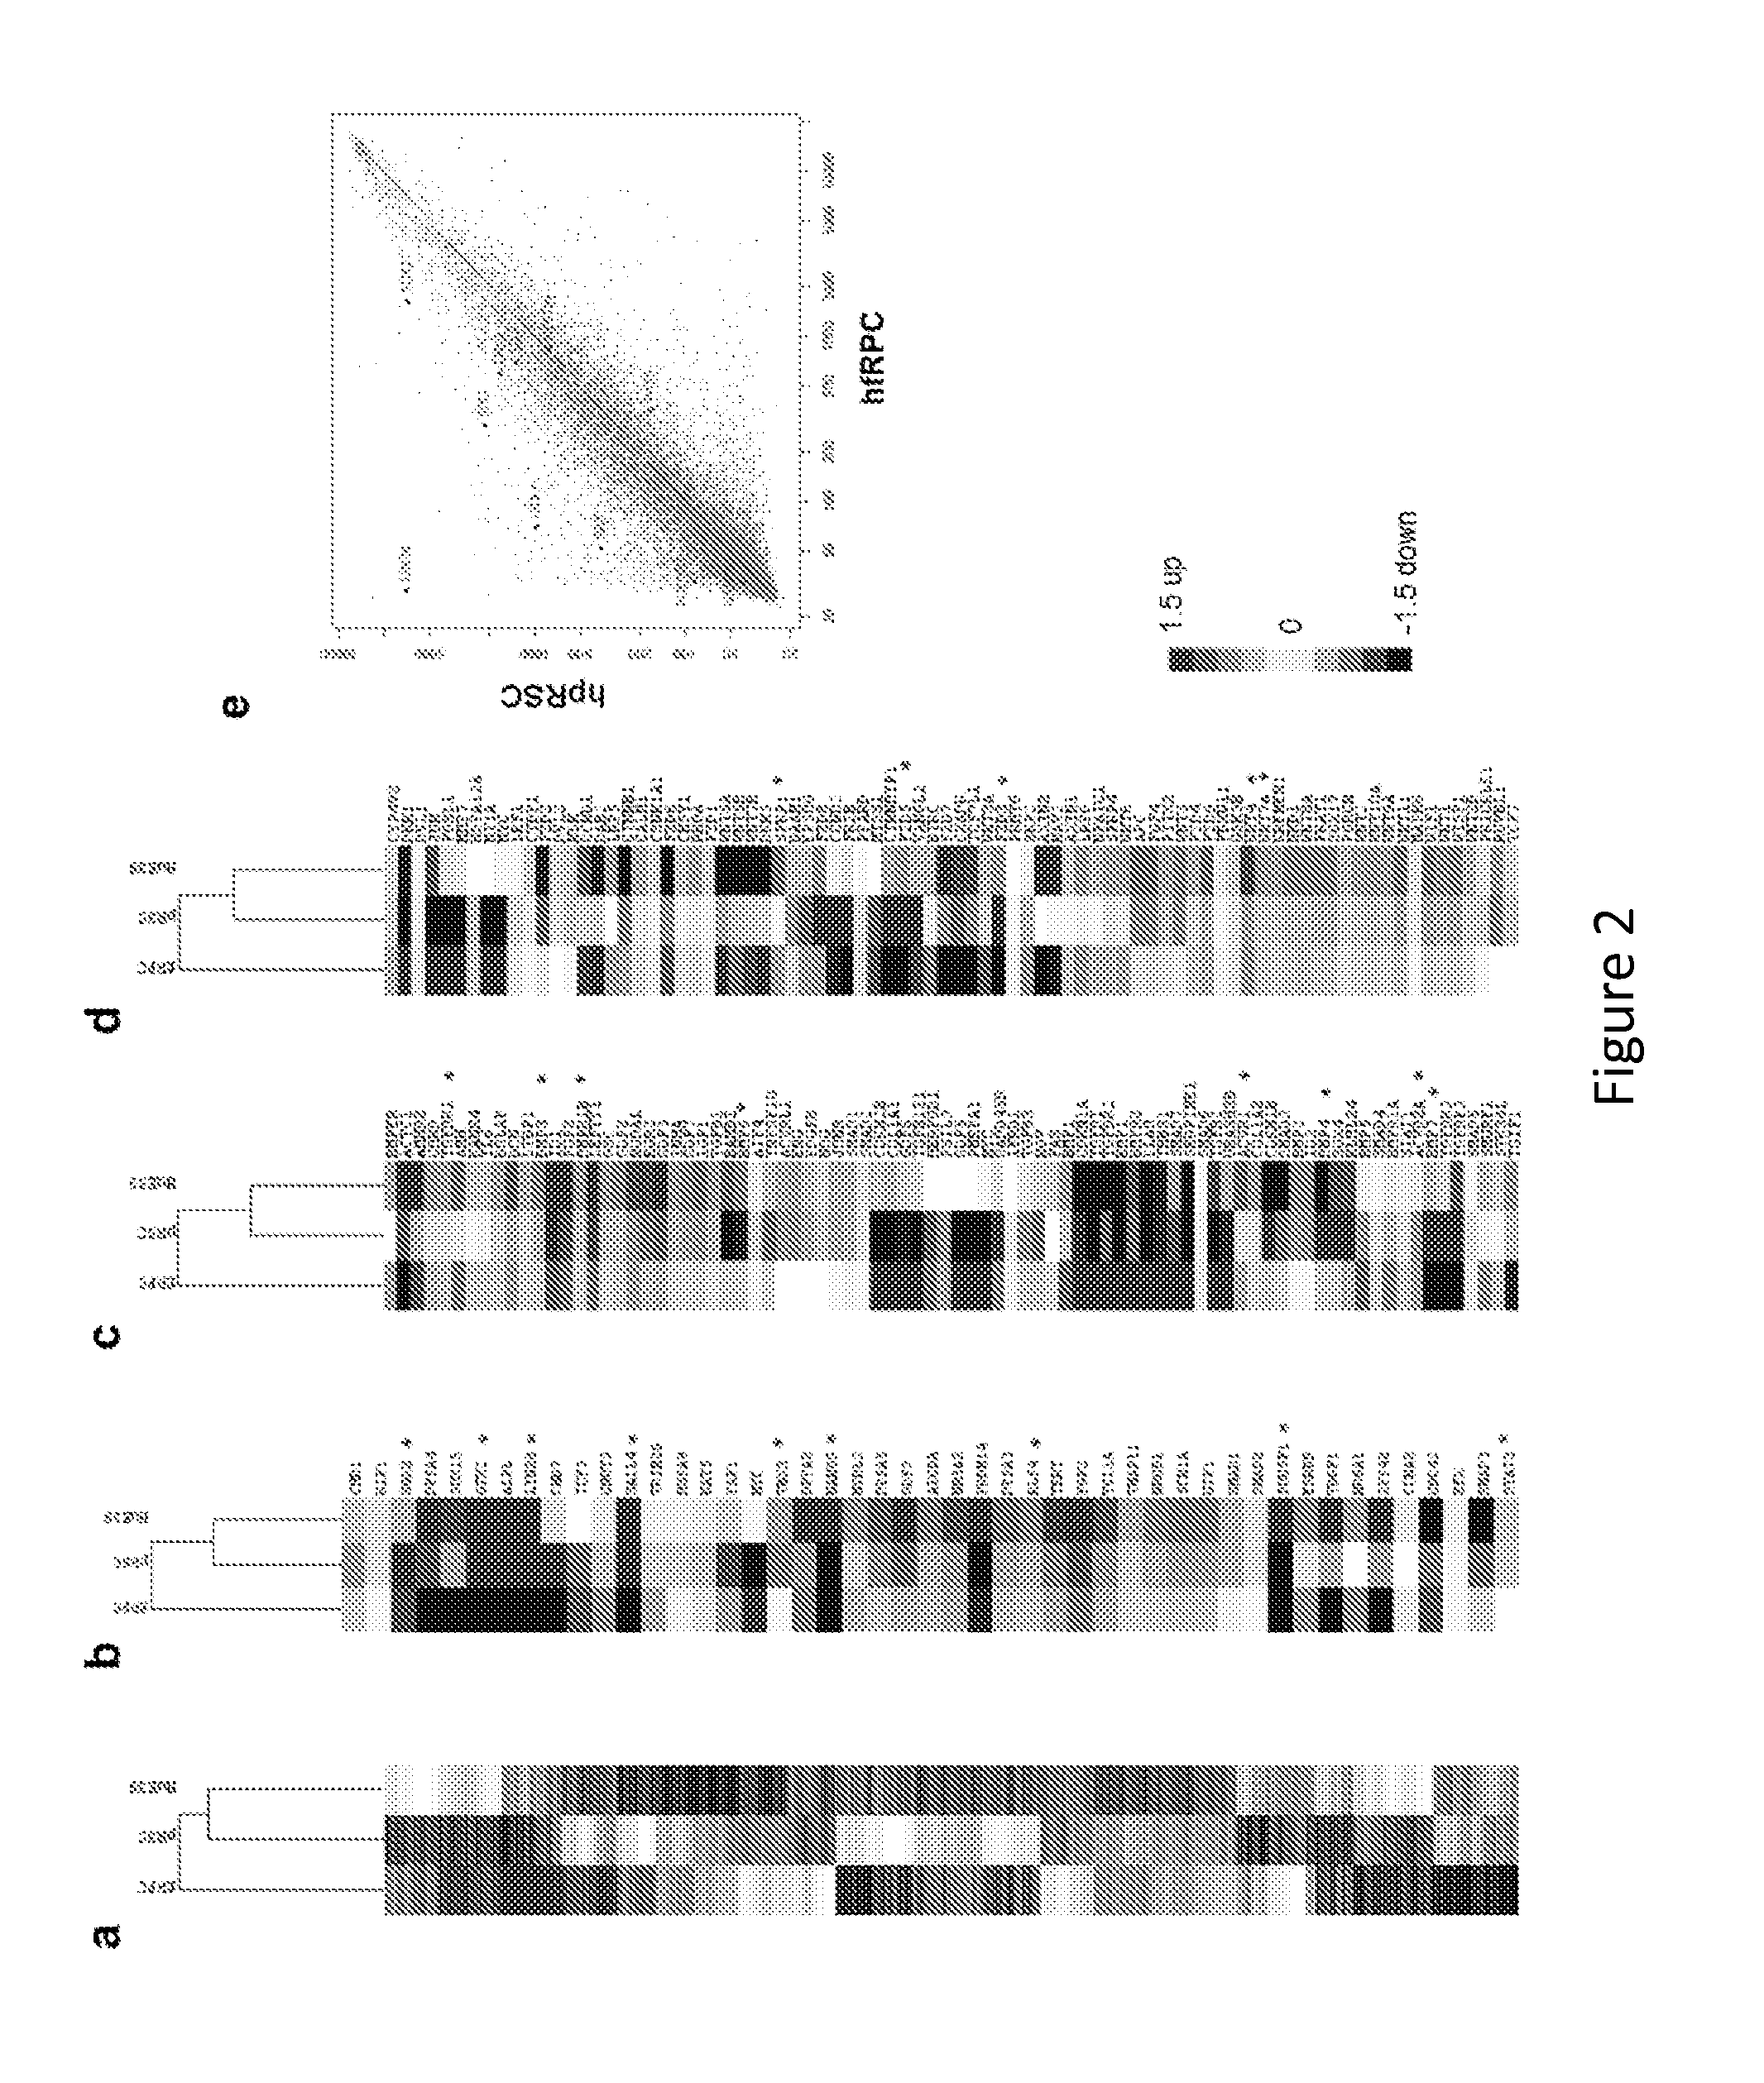 Methods of mammalian retinal stem cell production and applications